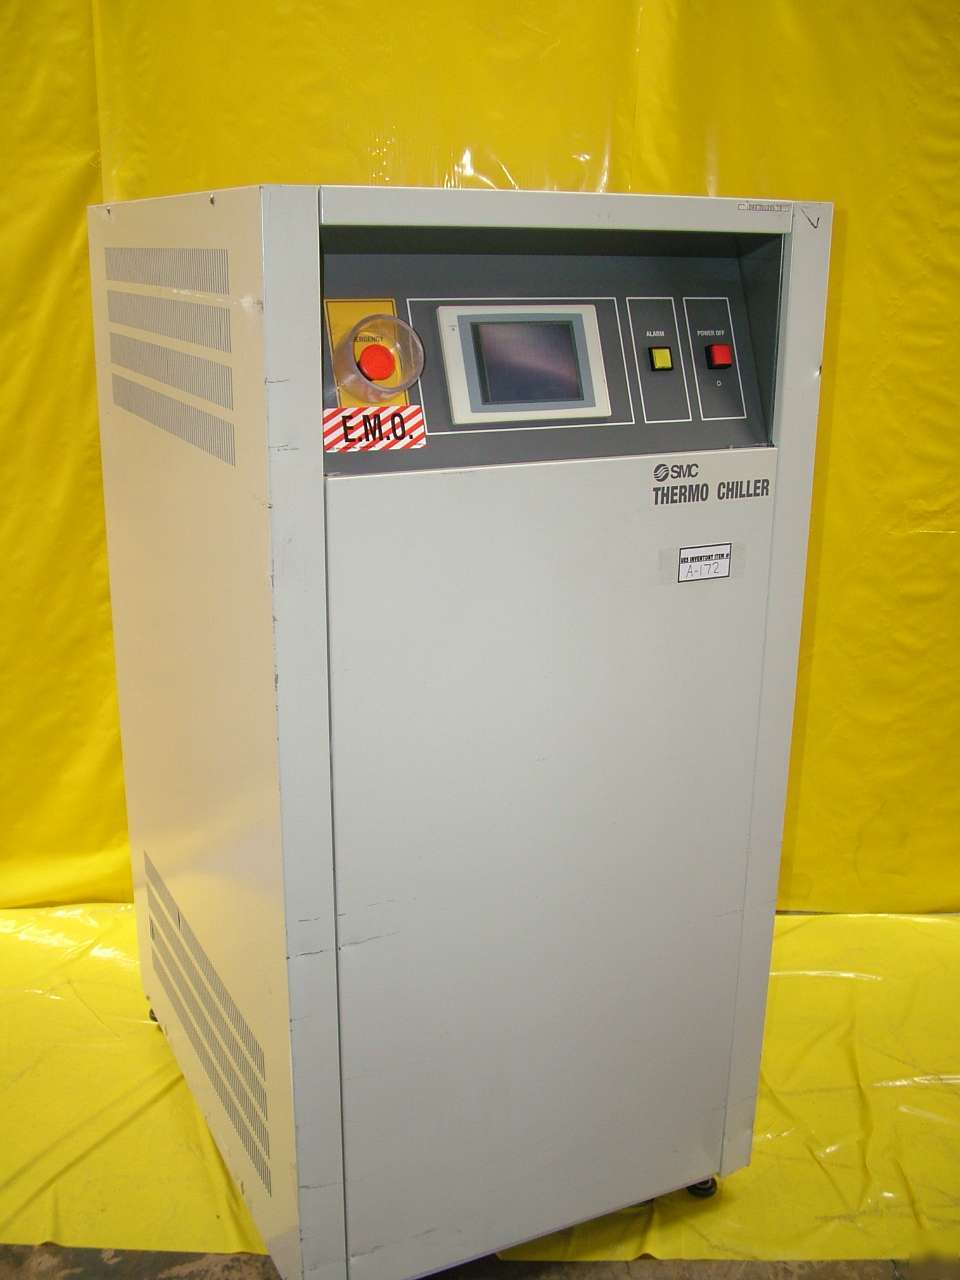 Smc thermo chiller tel unity inr-499-201 working